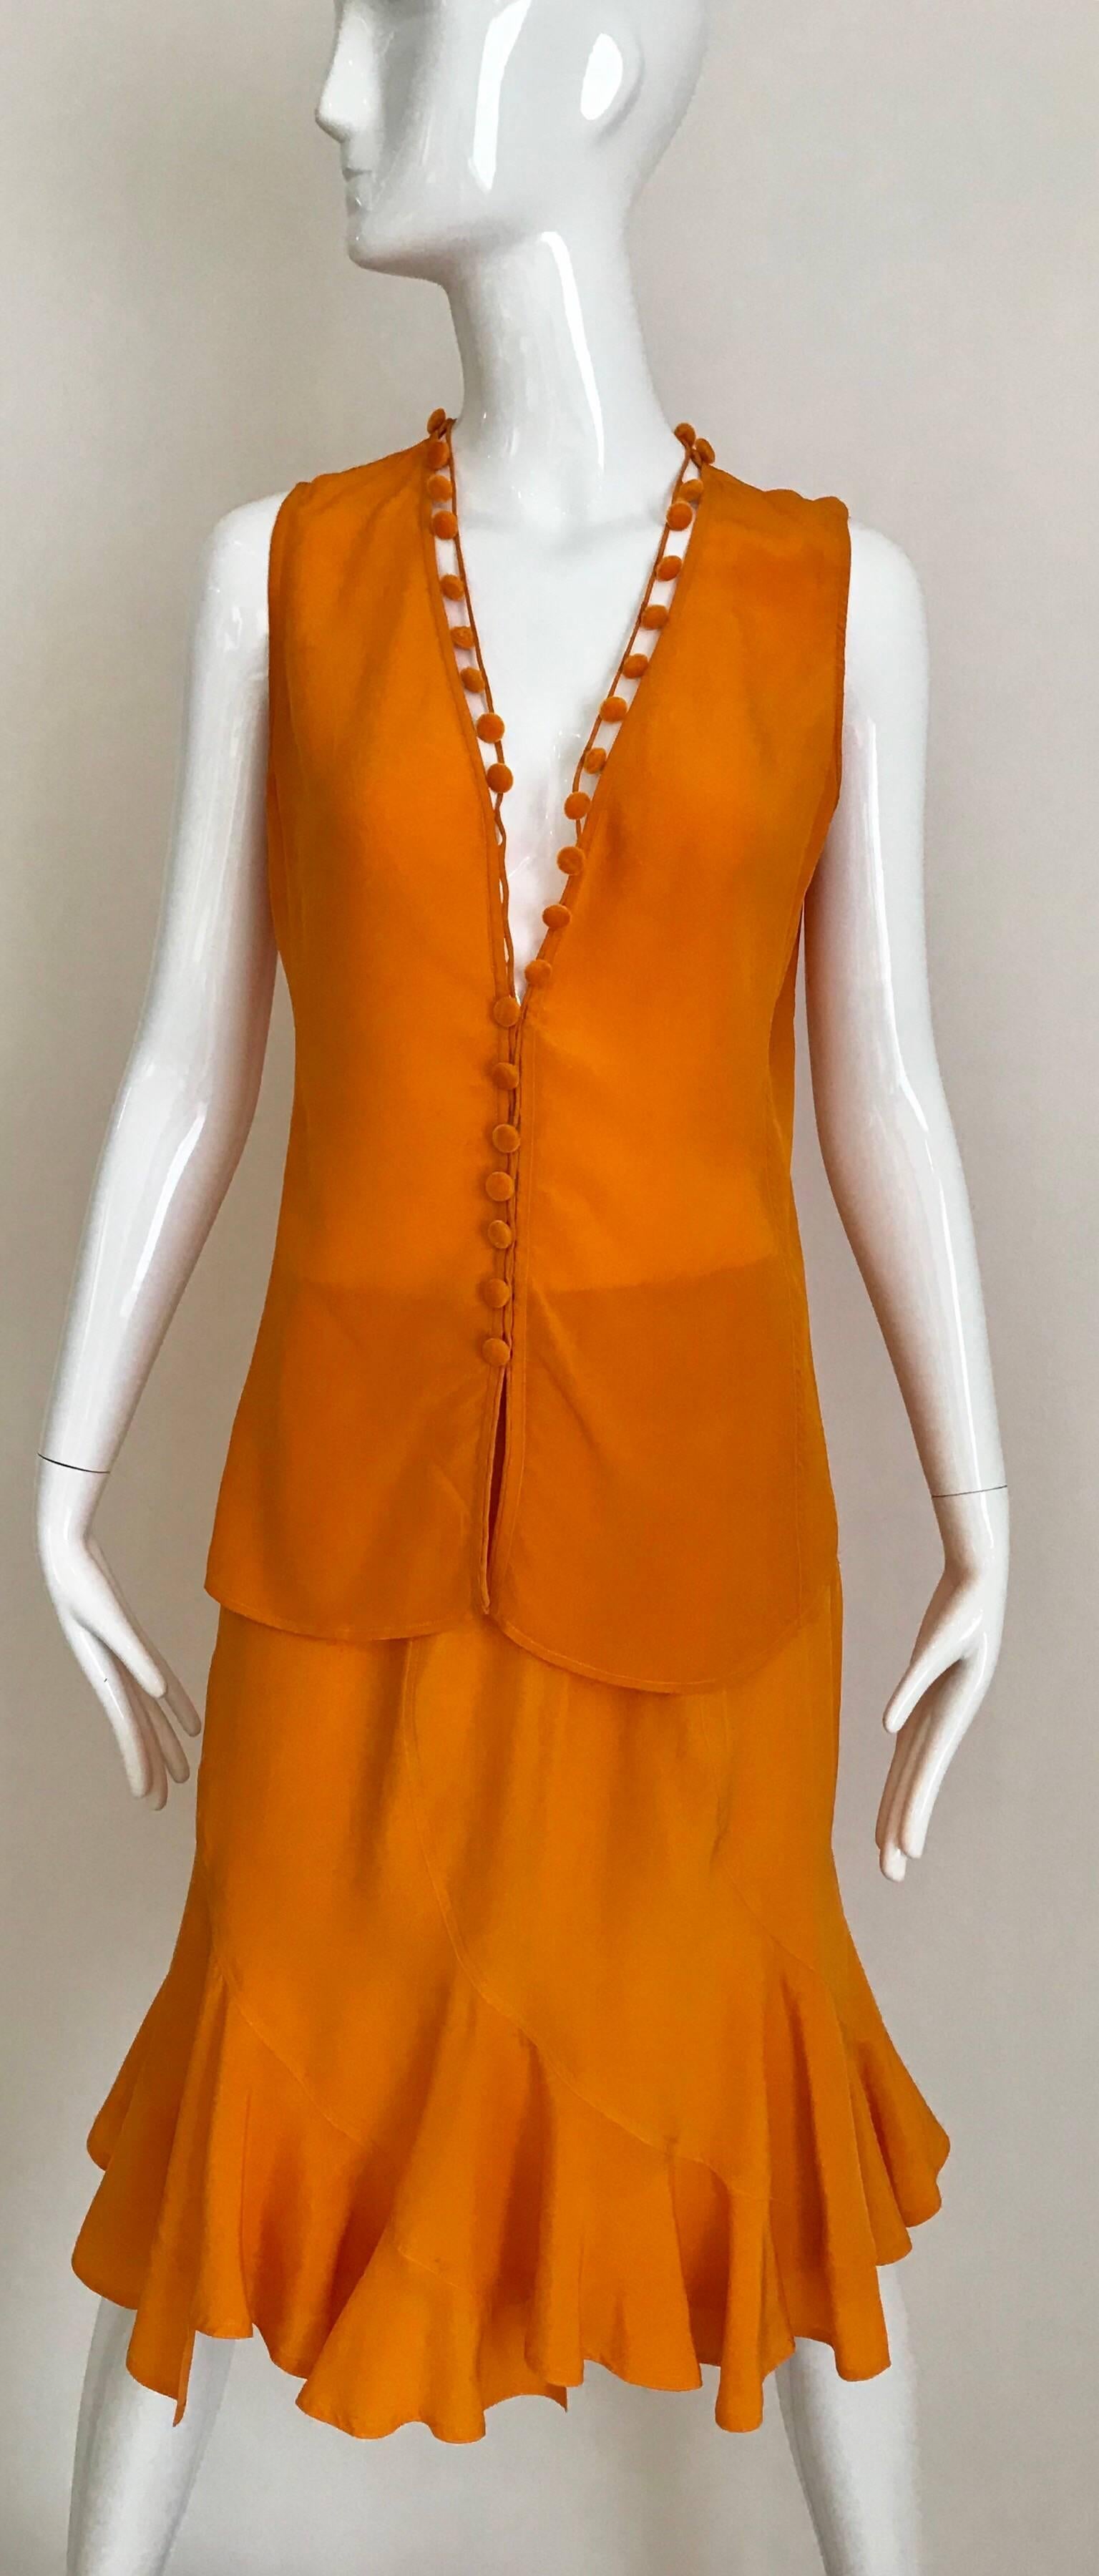 Beautiful summer Yves saint Laurent By Tom Ford. Sleeveless V neck blouse with dozens button and slightly flair skirt. Perfect for Beach cocktail party.
Fit size 4/6 US Medium size
Blouse: 38 inches . Waist: 31 inches/ Hip: 41’
Skirt : waist 27